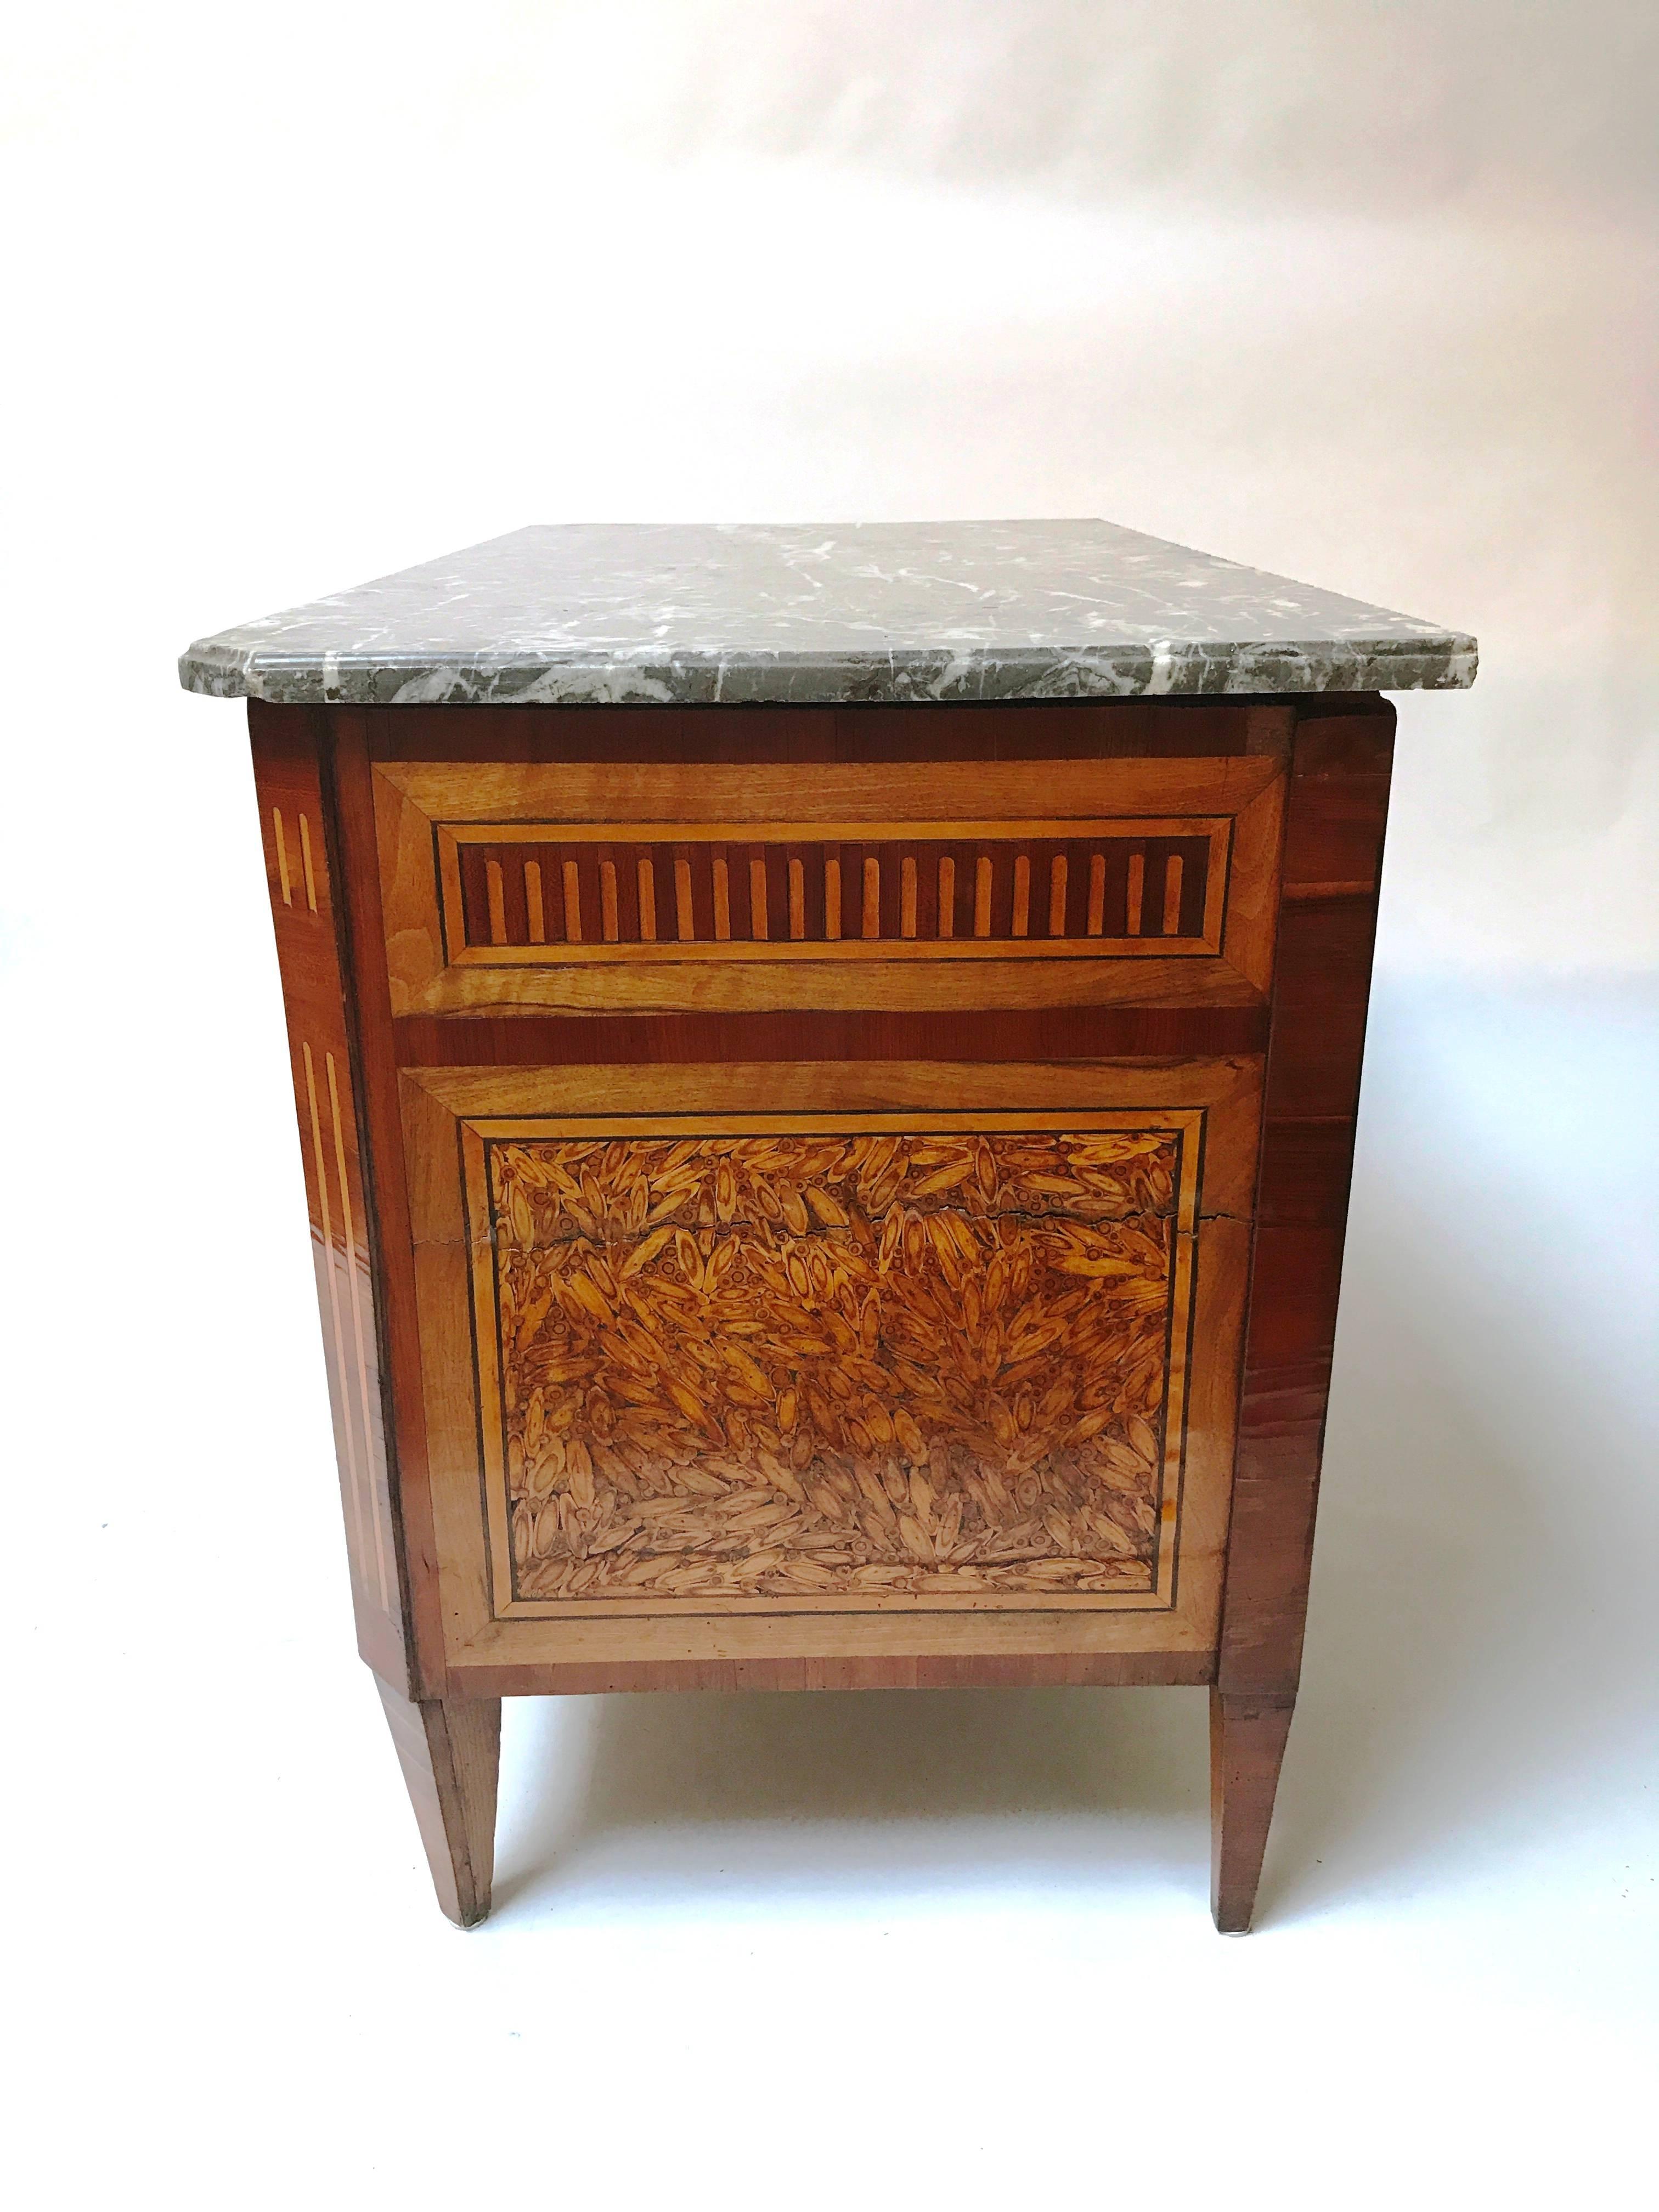 Stunning 18th century Italian oyster-veneered marble top commode, circa 1780, in the manner of Giuseppe Maggiolini, fitted with one narrow and two large drawers sans traverse with very fine inlaid marquetry of a landscape scene with villa and